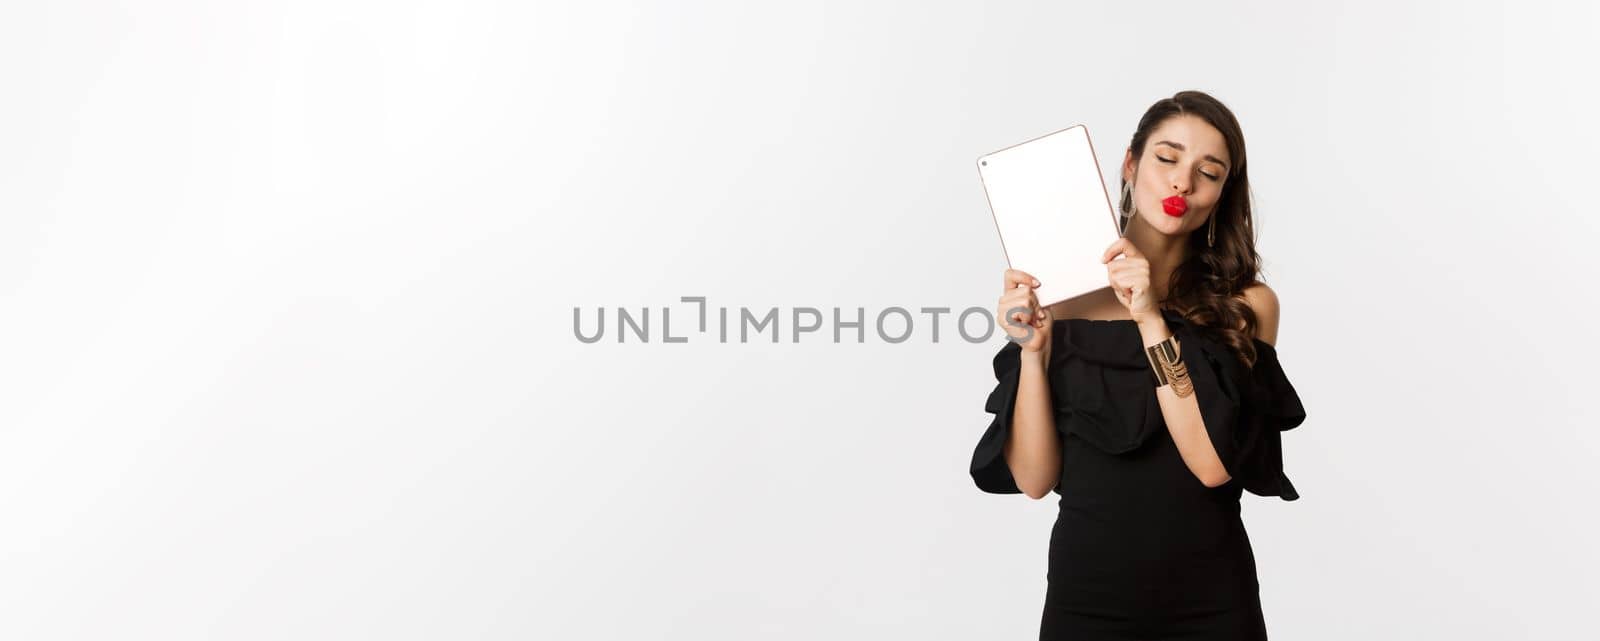 Fashion and shopping concept. Beautiful woman with red lips, wearing black dress, showing digital tablet and making kissing face, white background.